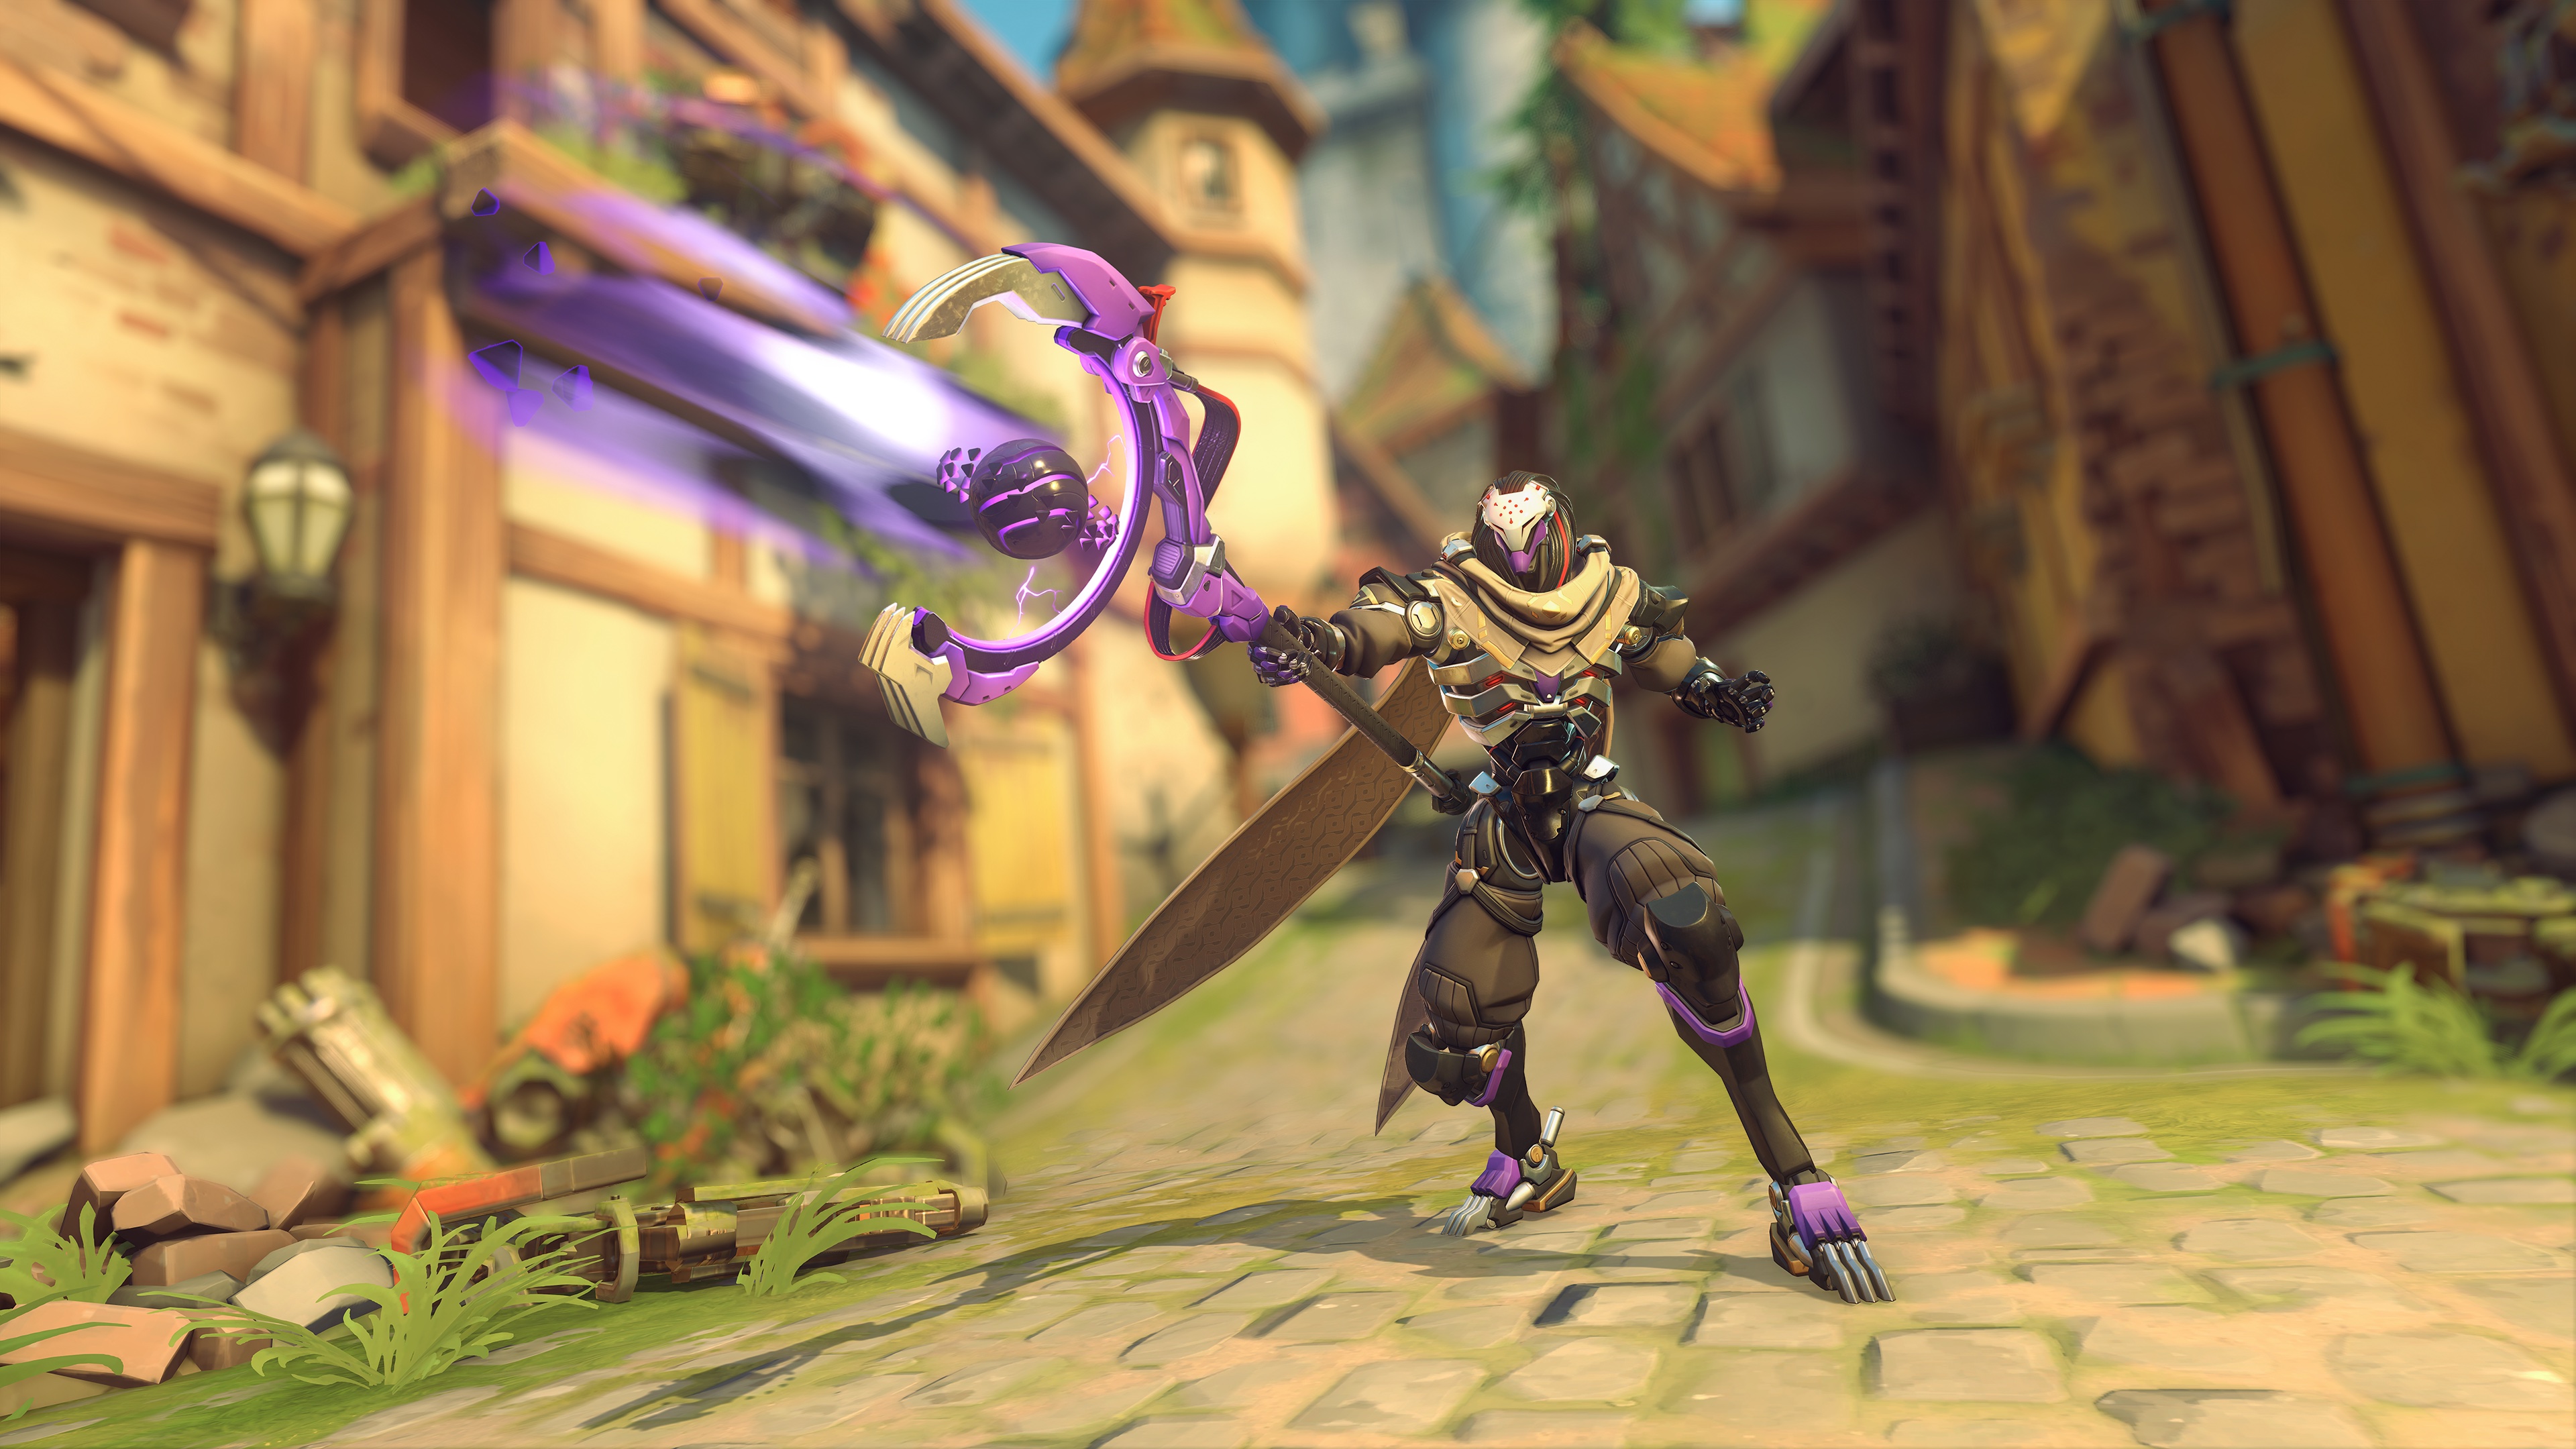 Ramattra fires his staff weapon on the cobblestone streets of Eichenwald in a screenshot from Overwatch 2